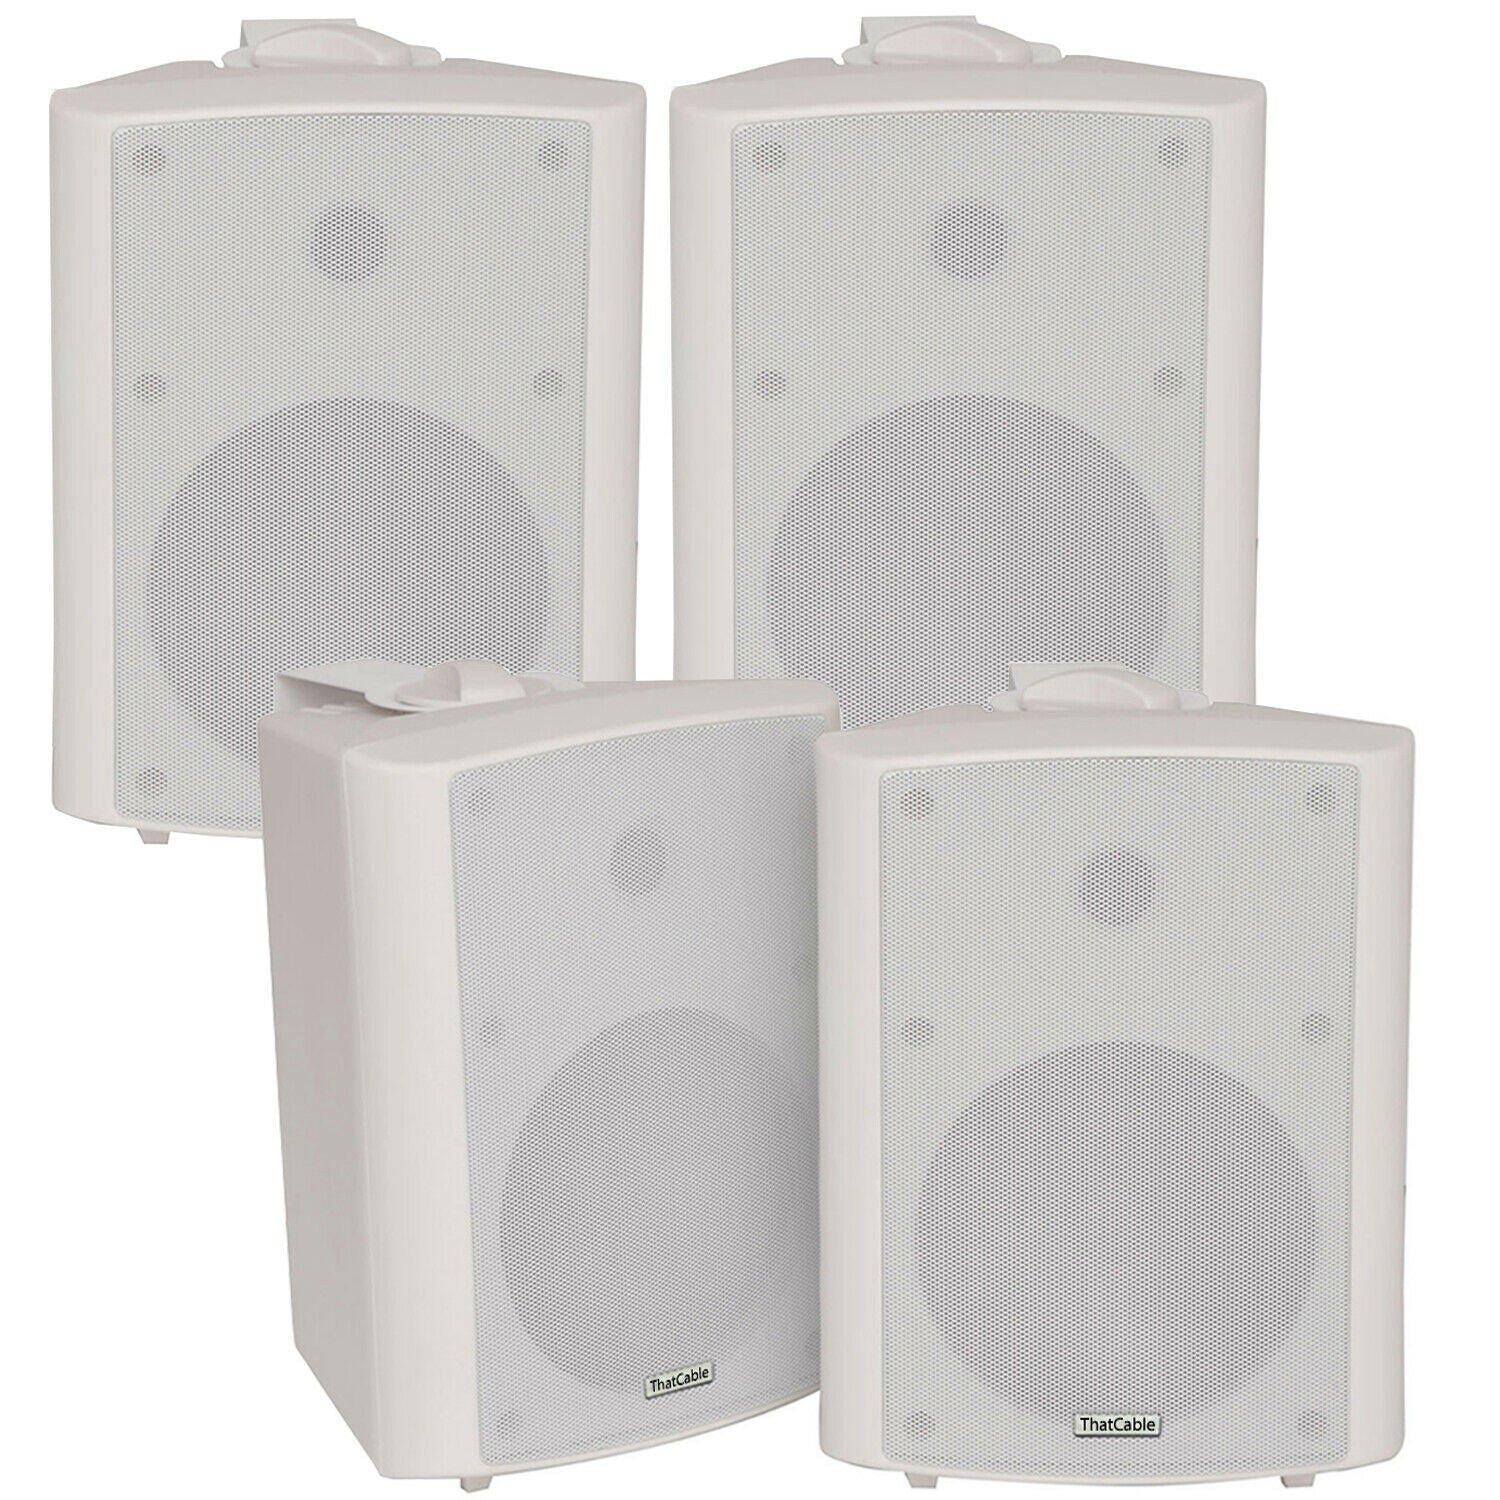 4x 120W White Wall Mounted Stereo Speakers 6.5